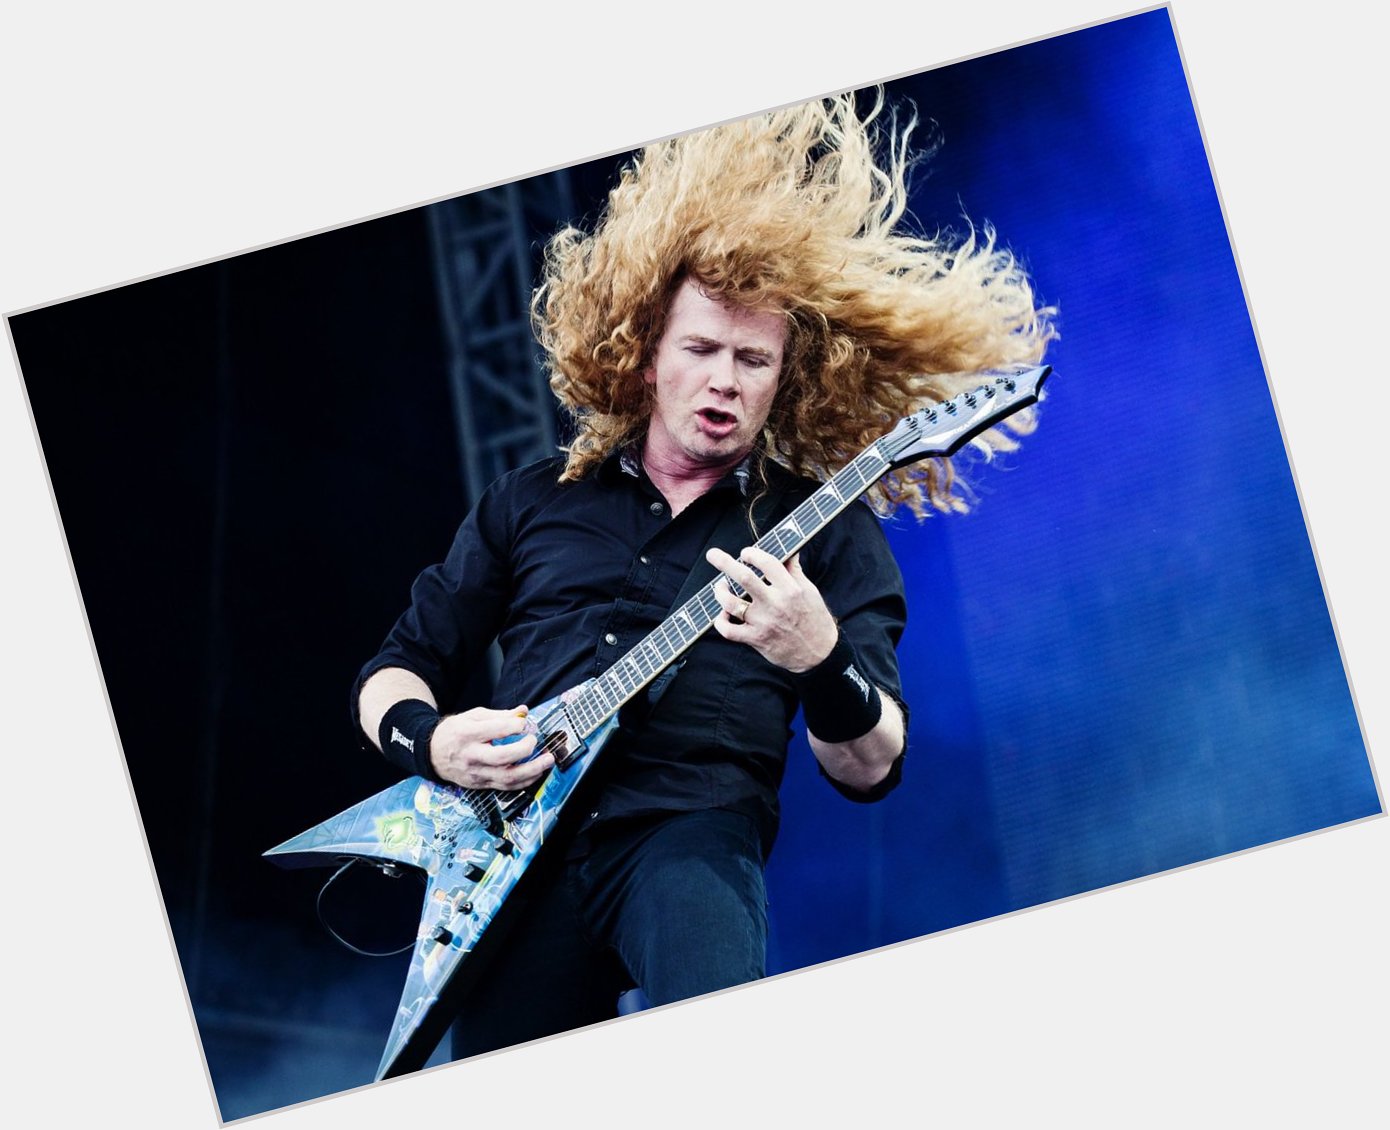 Happy Birthday \Dave Mustaine\
Band: Megadeth
Age: 57 